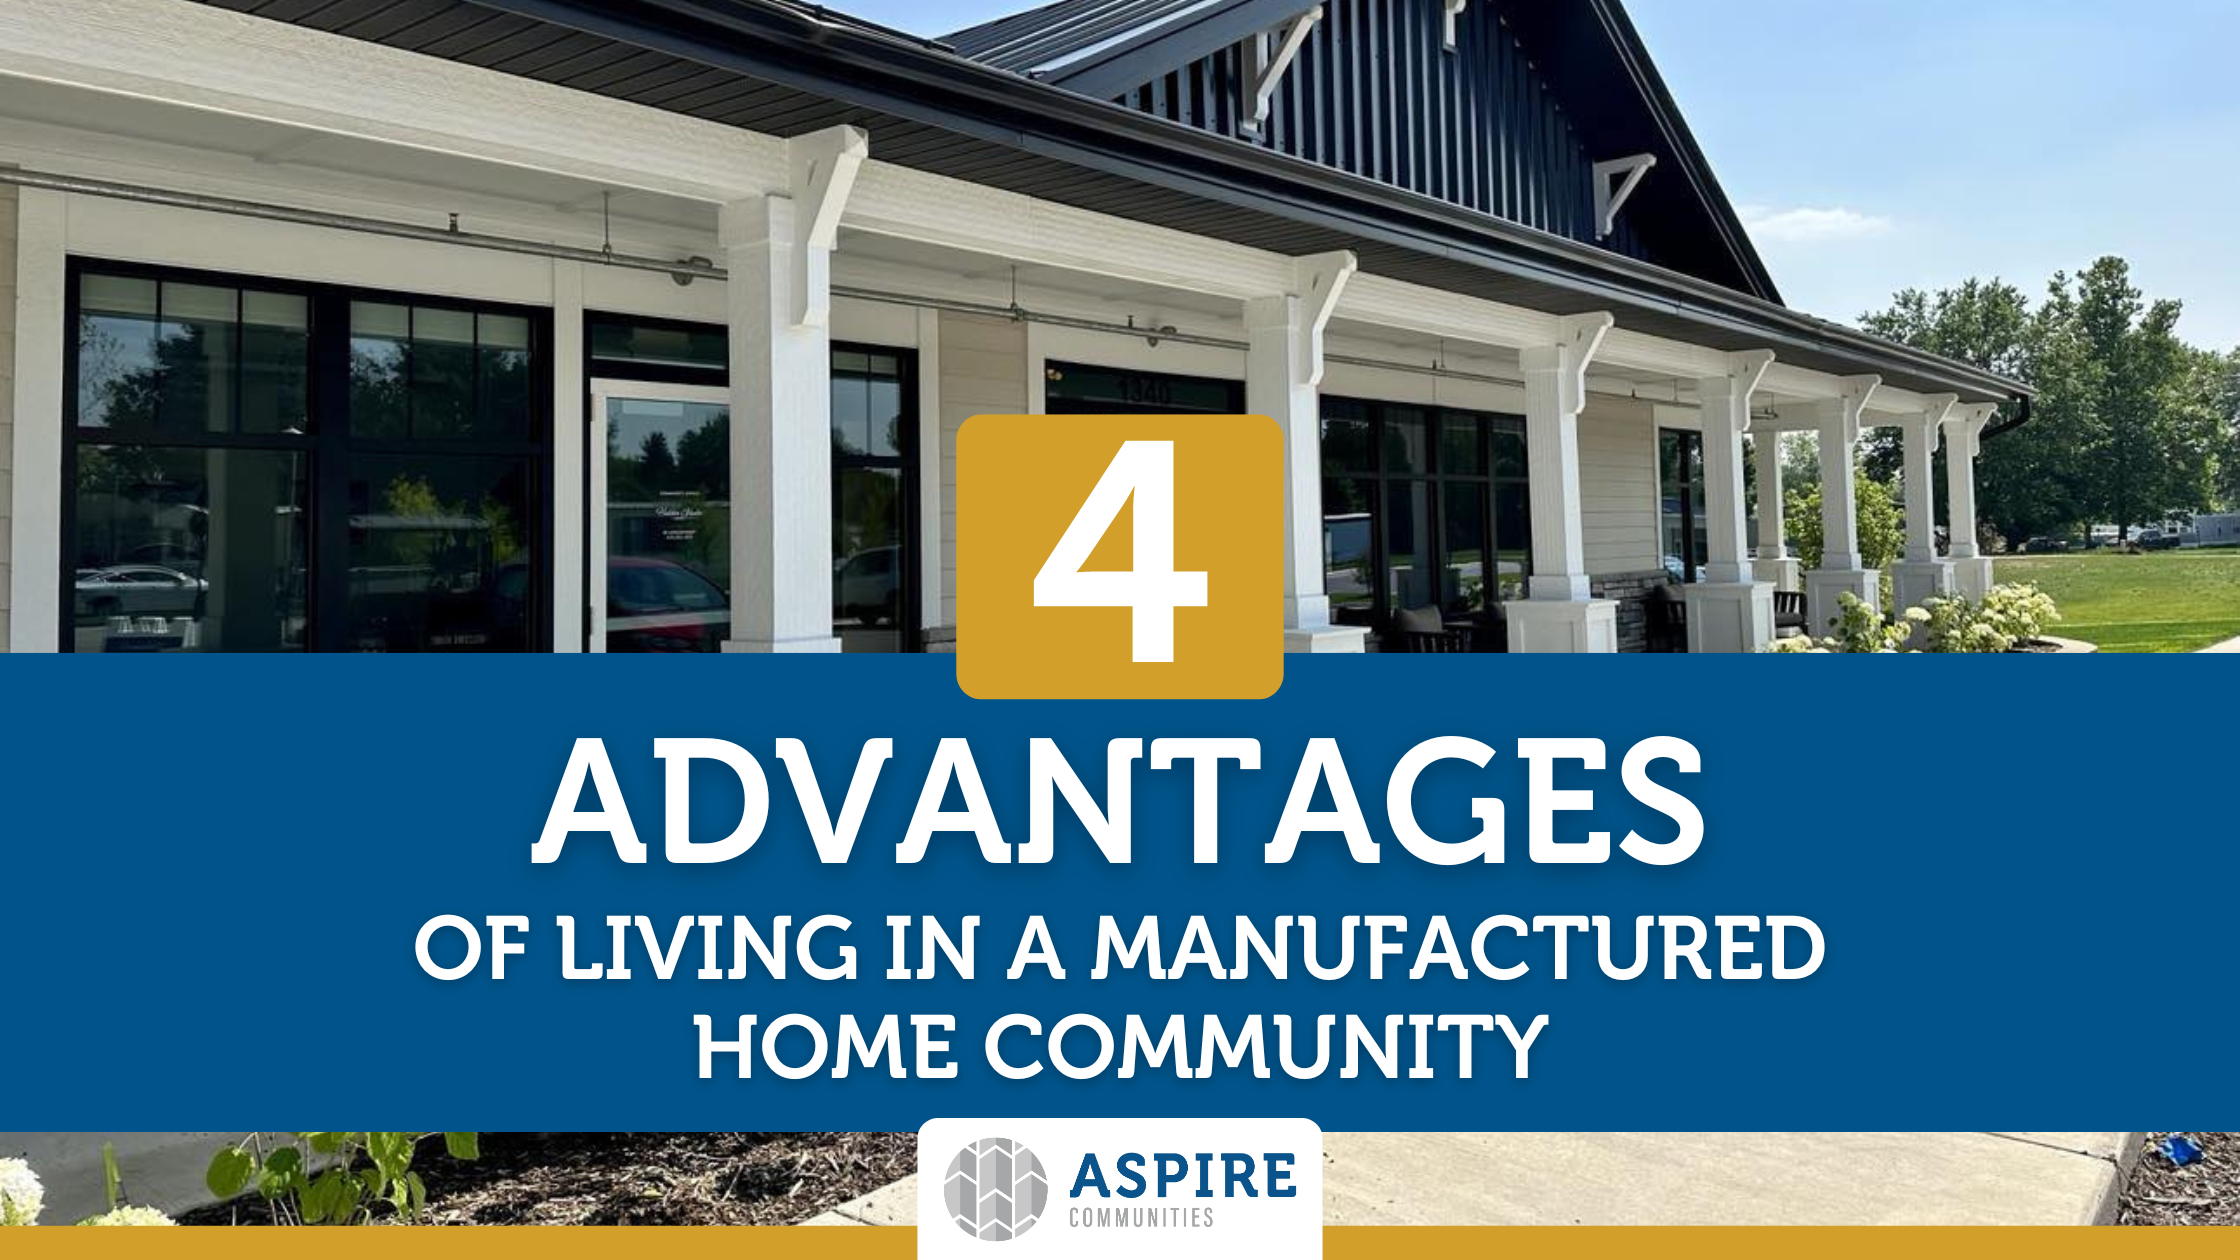 A modern residential building with a sign reading "4 Advantages of Living in a Manufactured Home Community" by Aspire Communities. Trees and clear skies stretch out in the background, highlighting the serene setting.